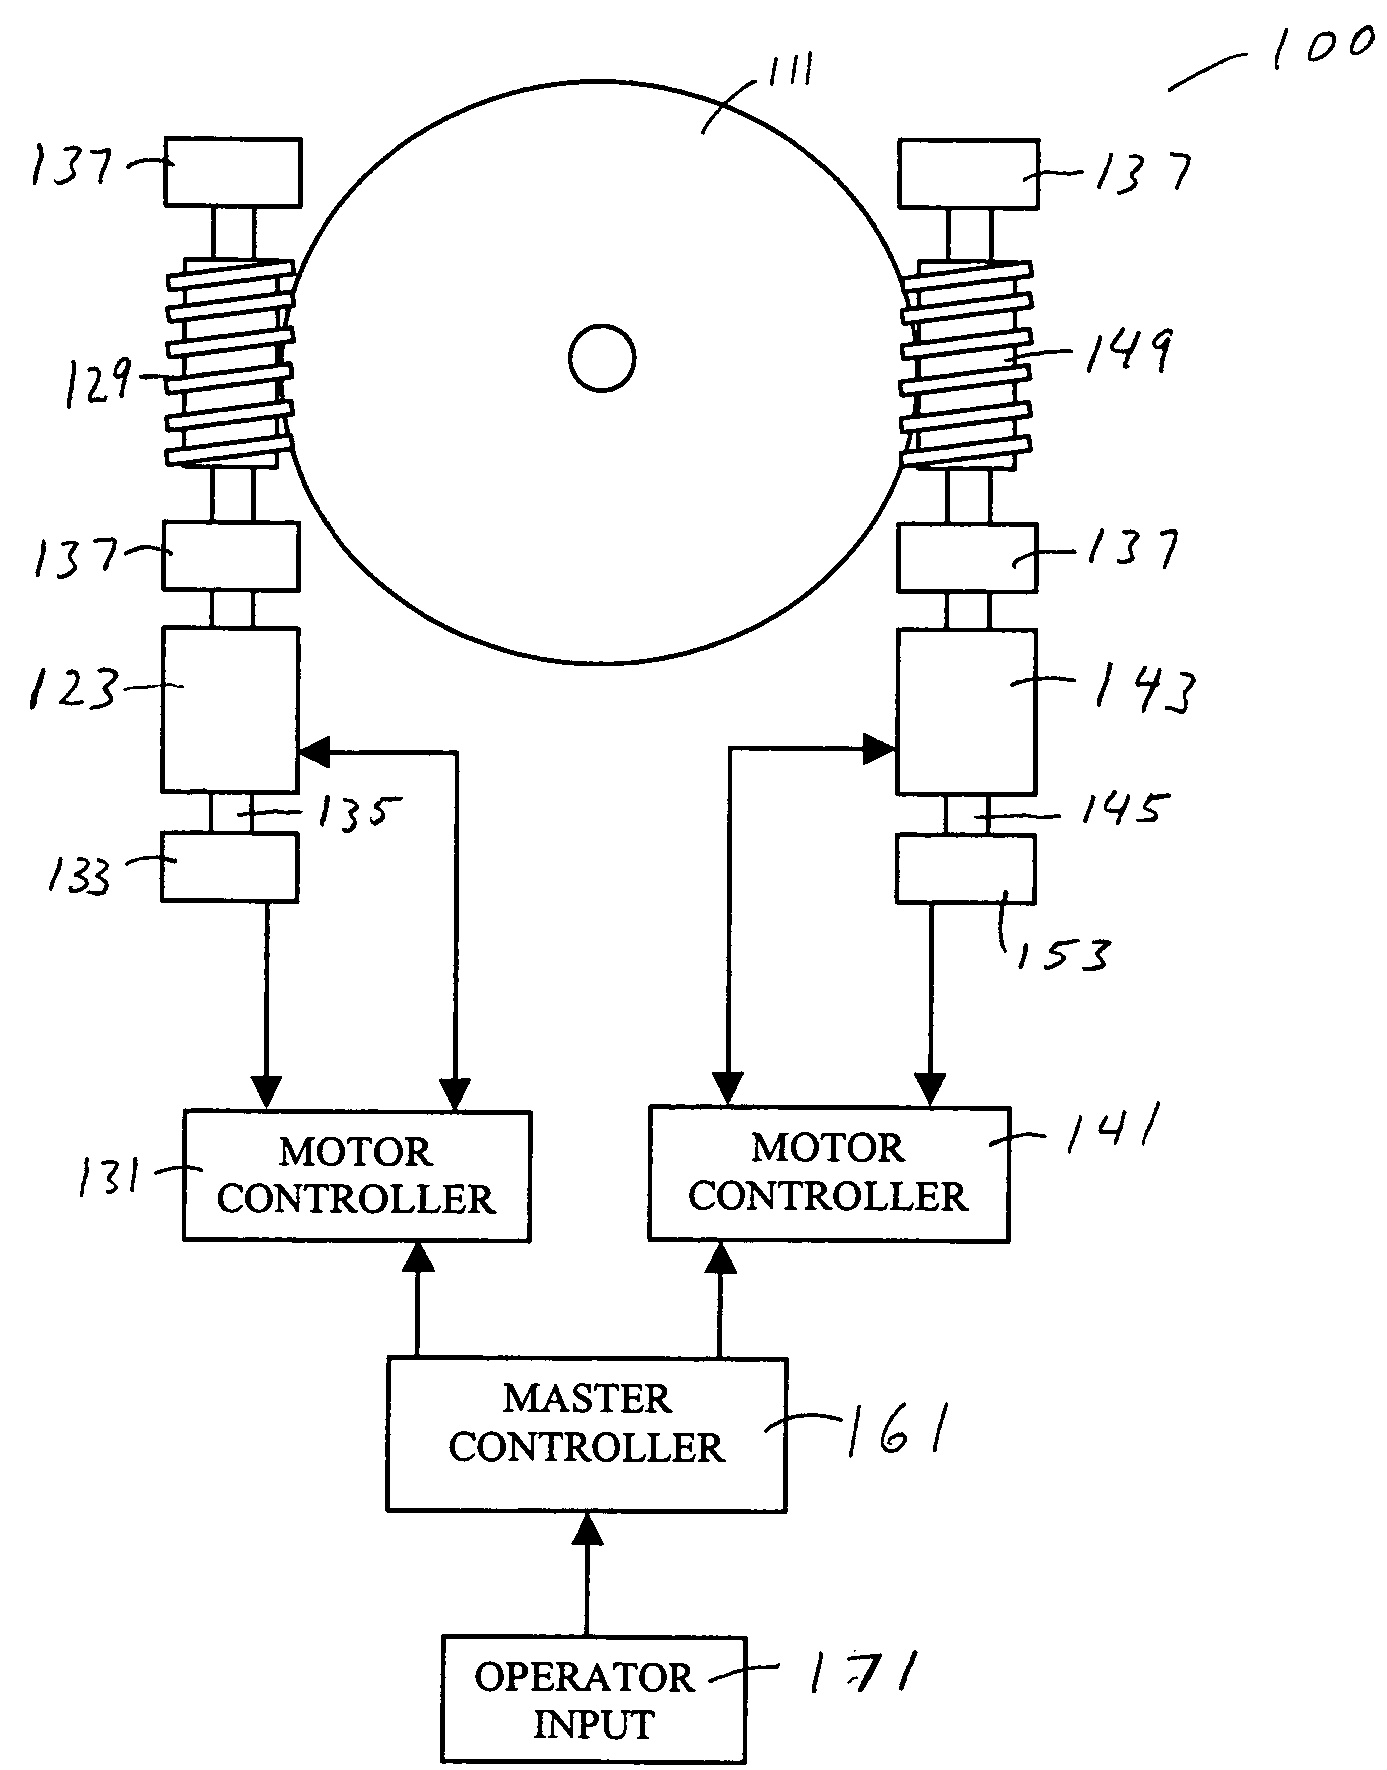 Rotating drive module with position locking mechanism